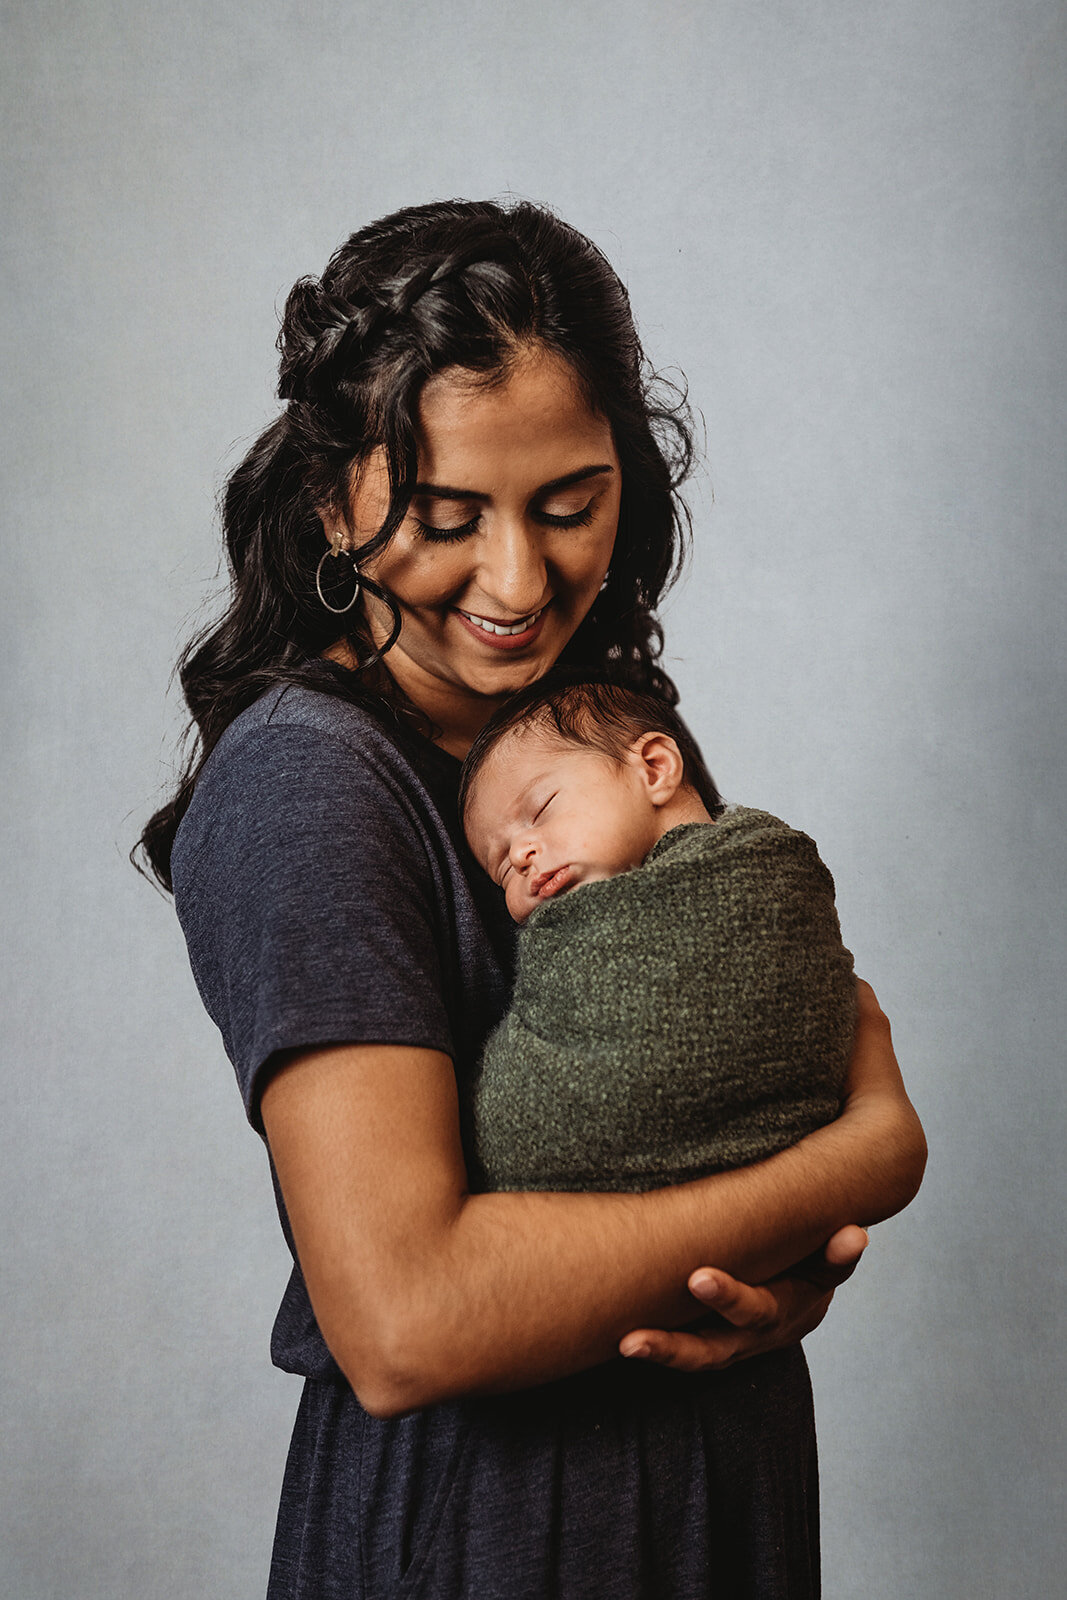 newborn photos with mother in grey dress holding her baby who is wrapped in a dark green swaddle for an in studio newborn session photographed by Family photographers Maryland